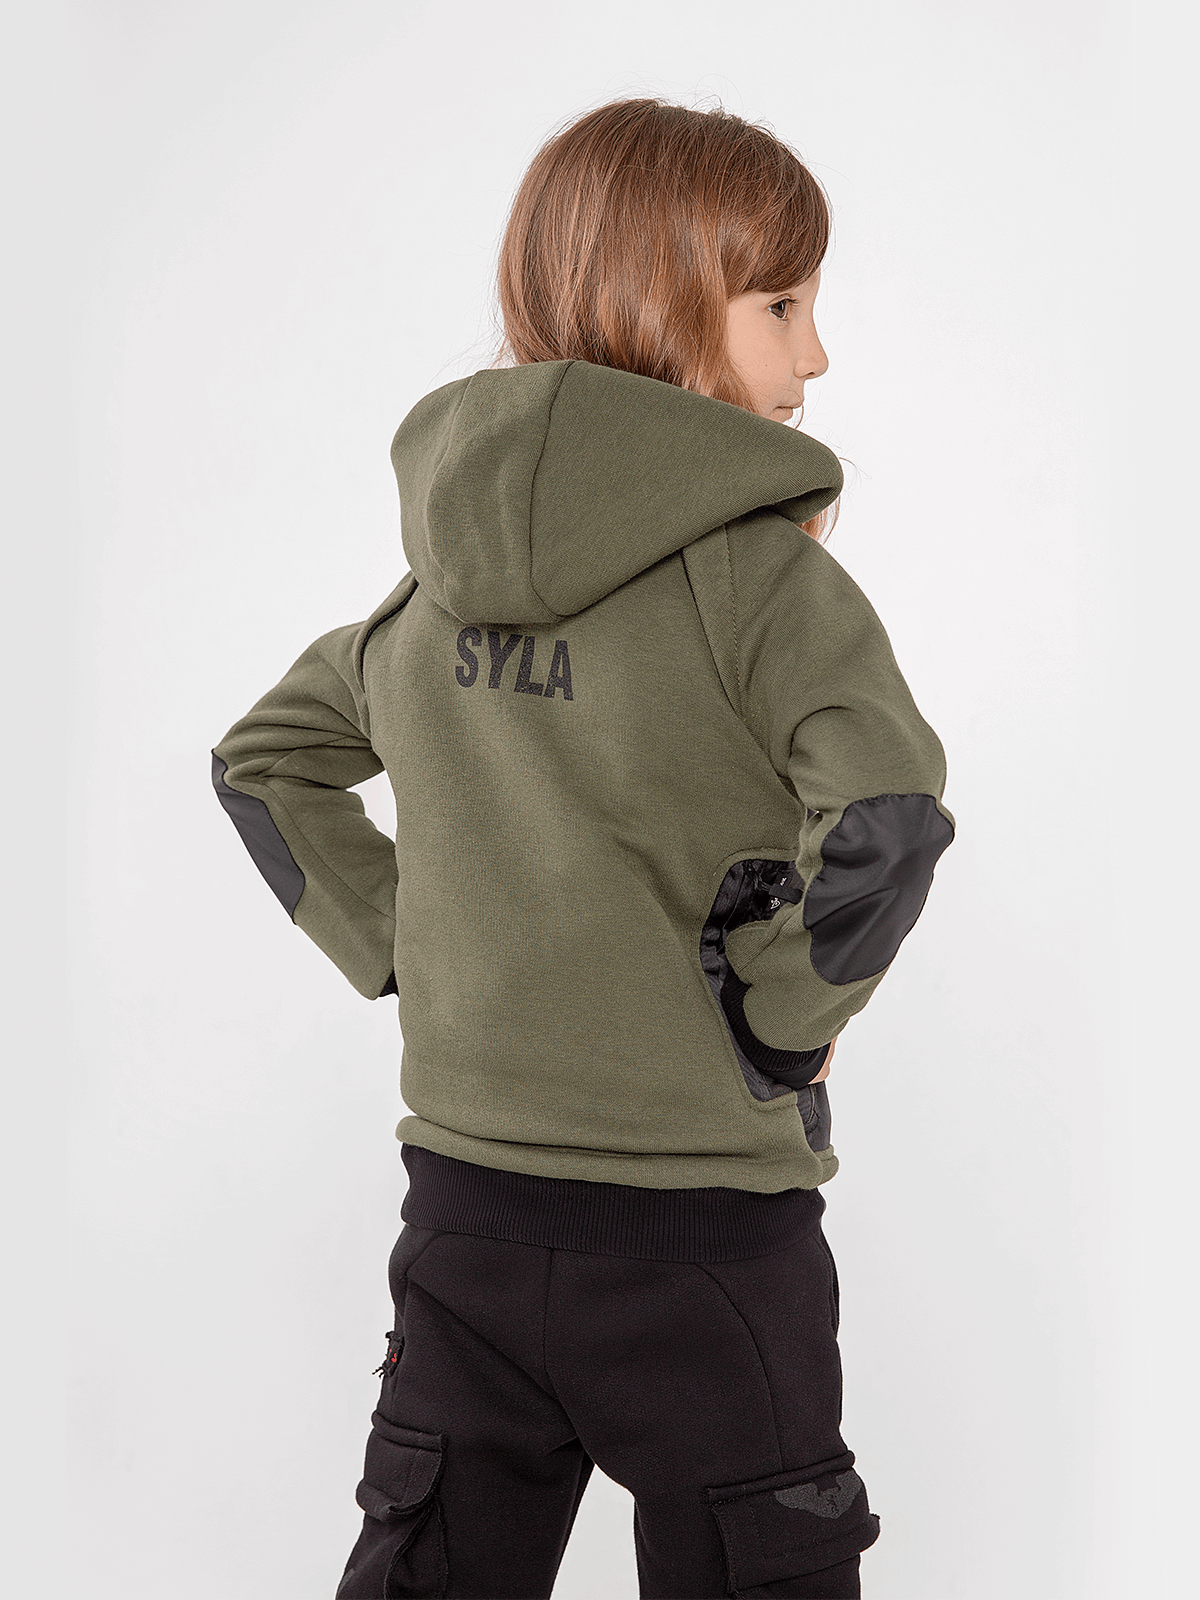 Kids Hoodie Syla. Color khaki. 
Material of the inserts – oxford cloth, 100% polyester.